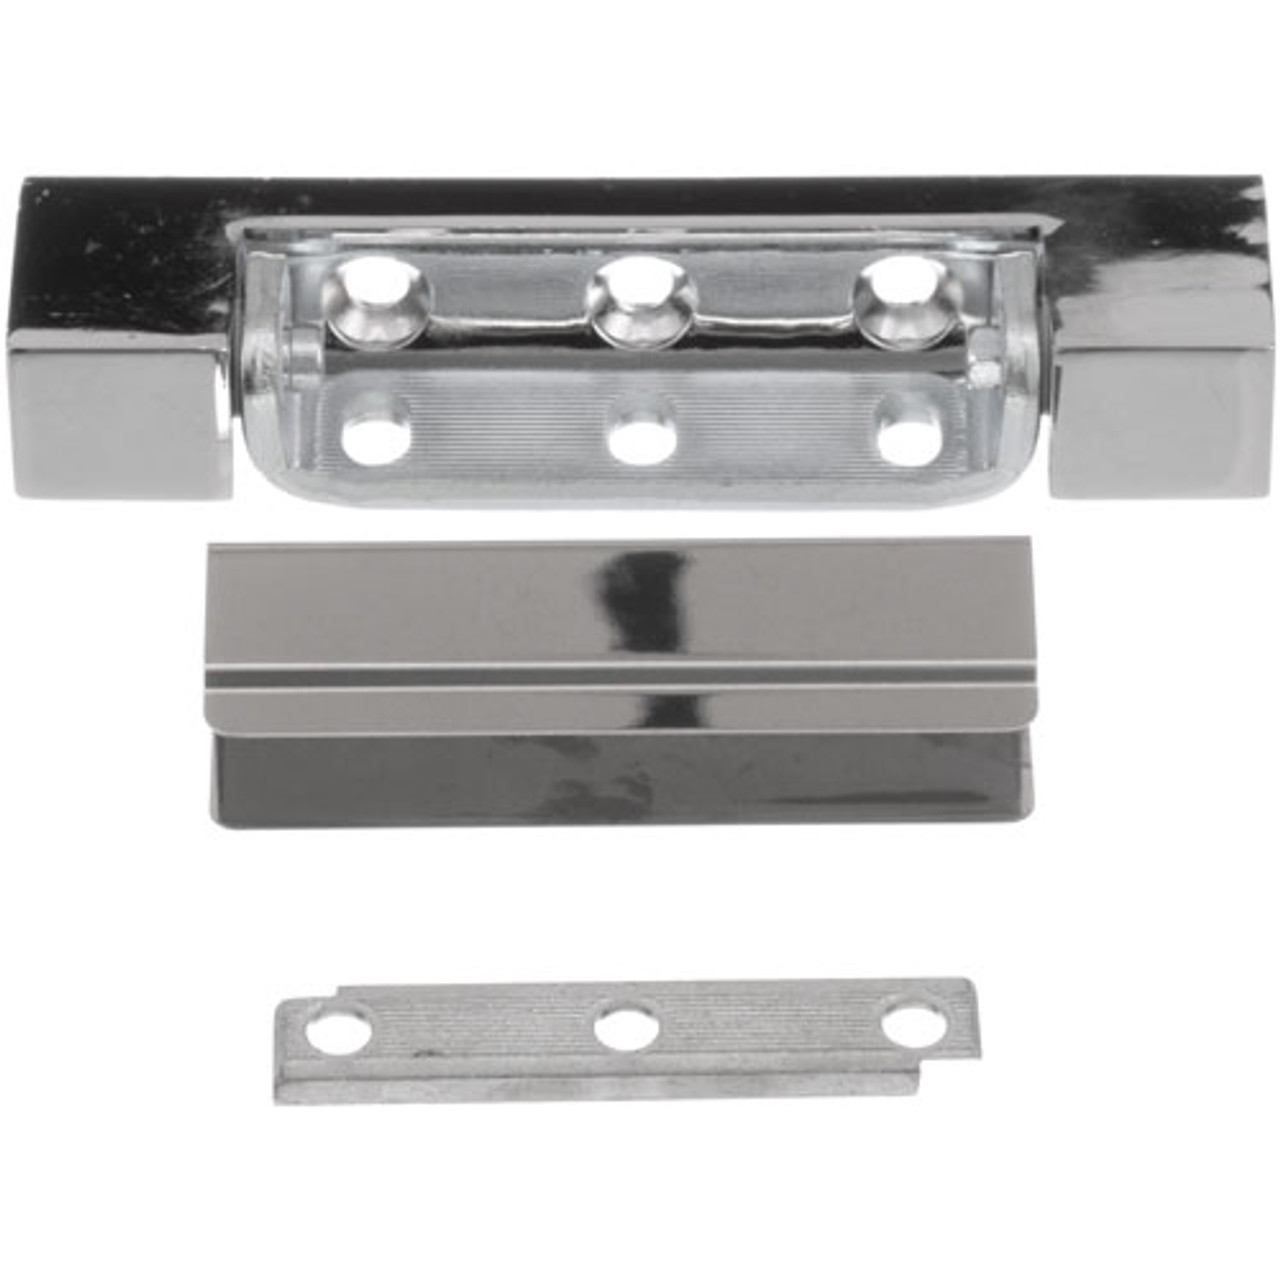 Hinge - Replacement Part For Piper Products 305012